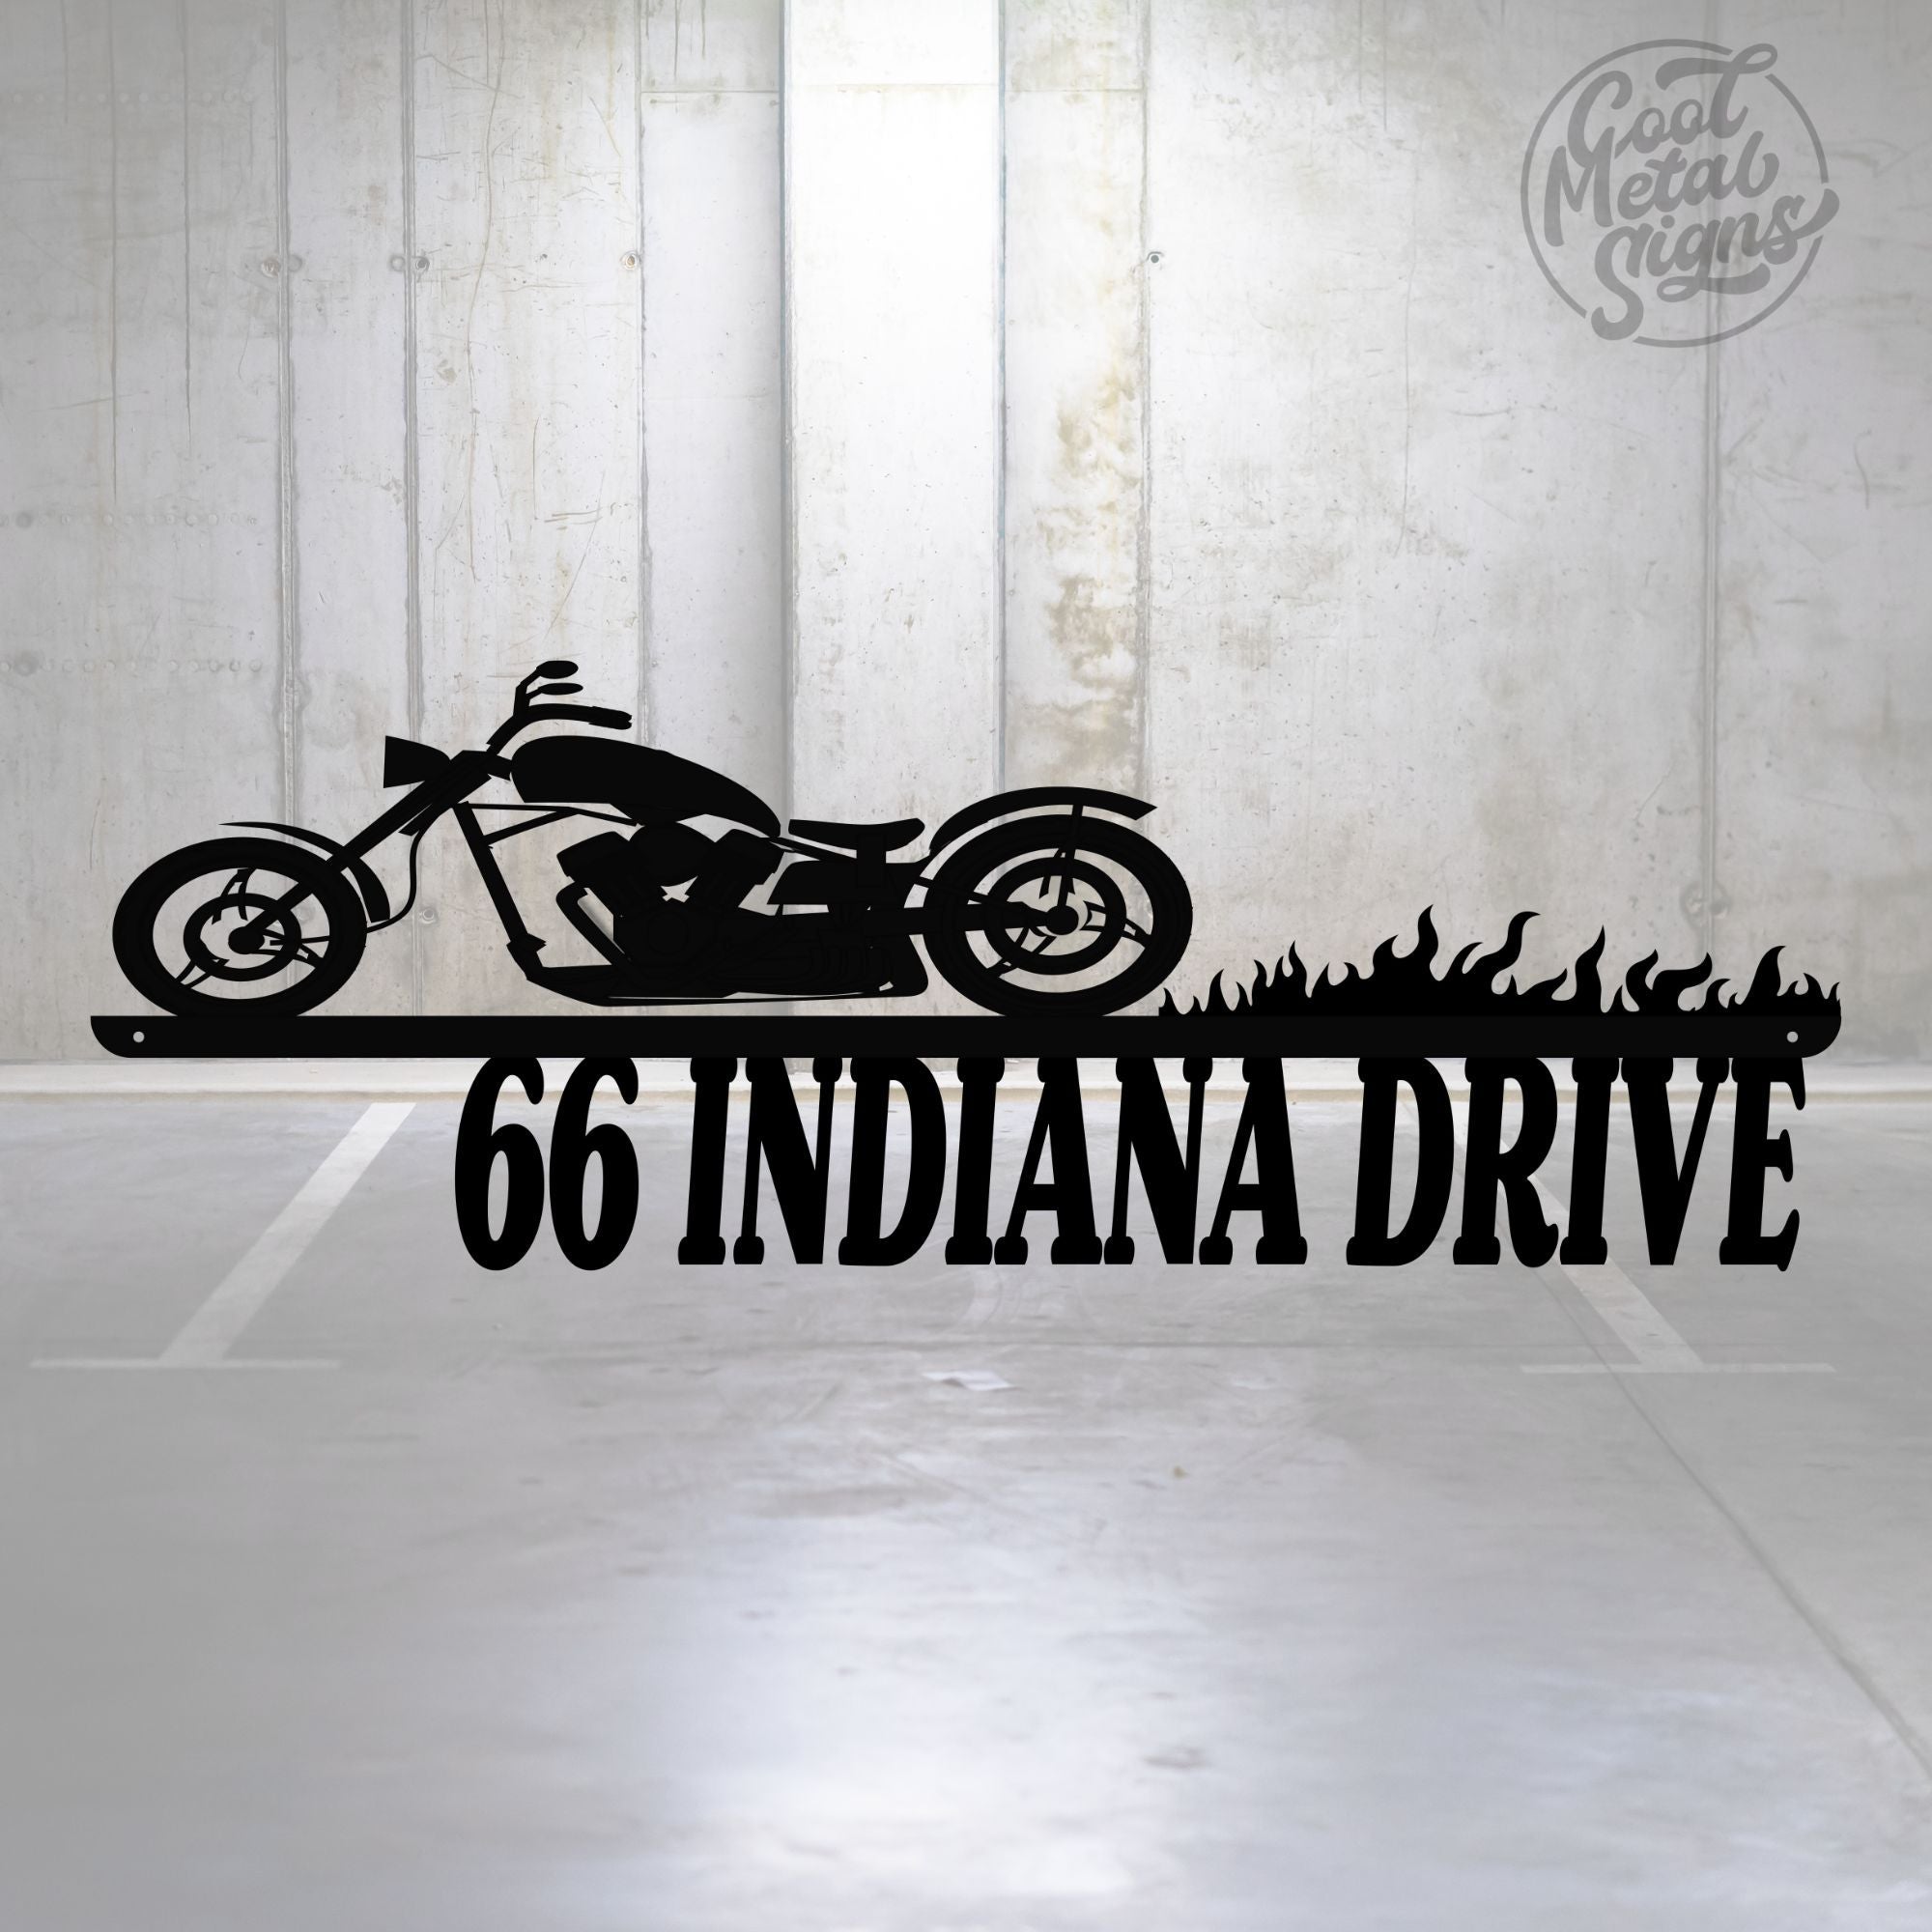 Personalized Motorcycle Address Sign - Cool Metal Signs